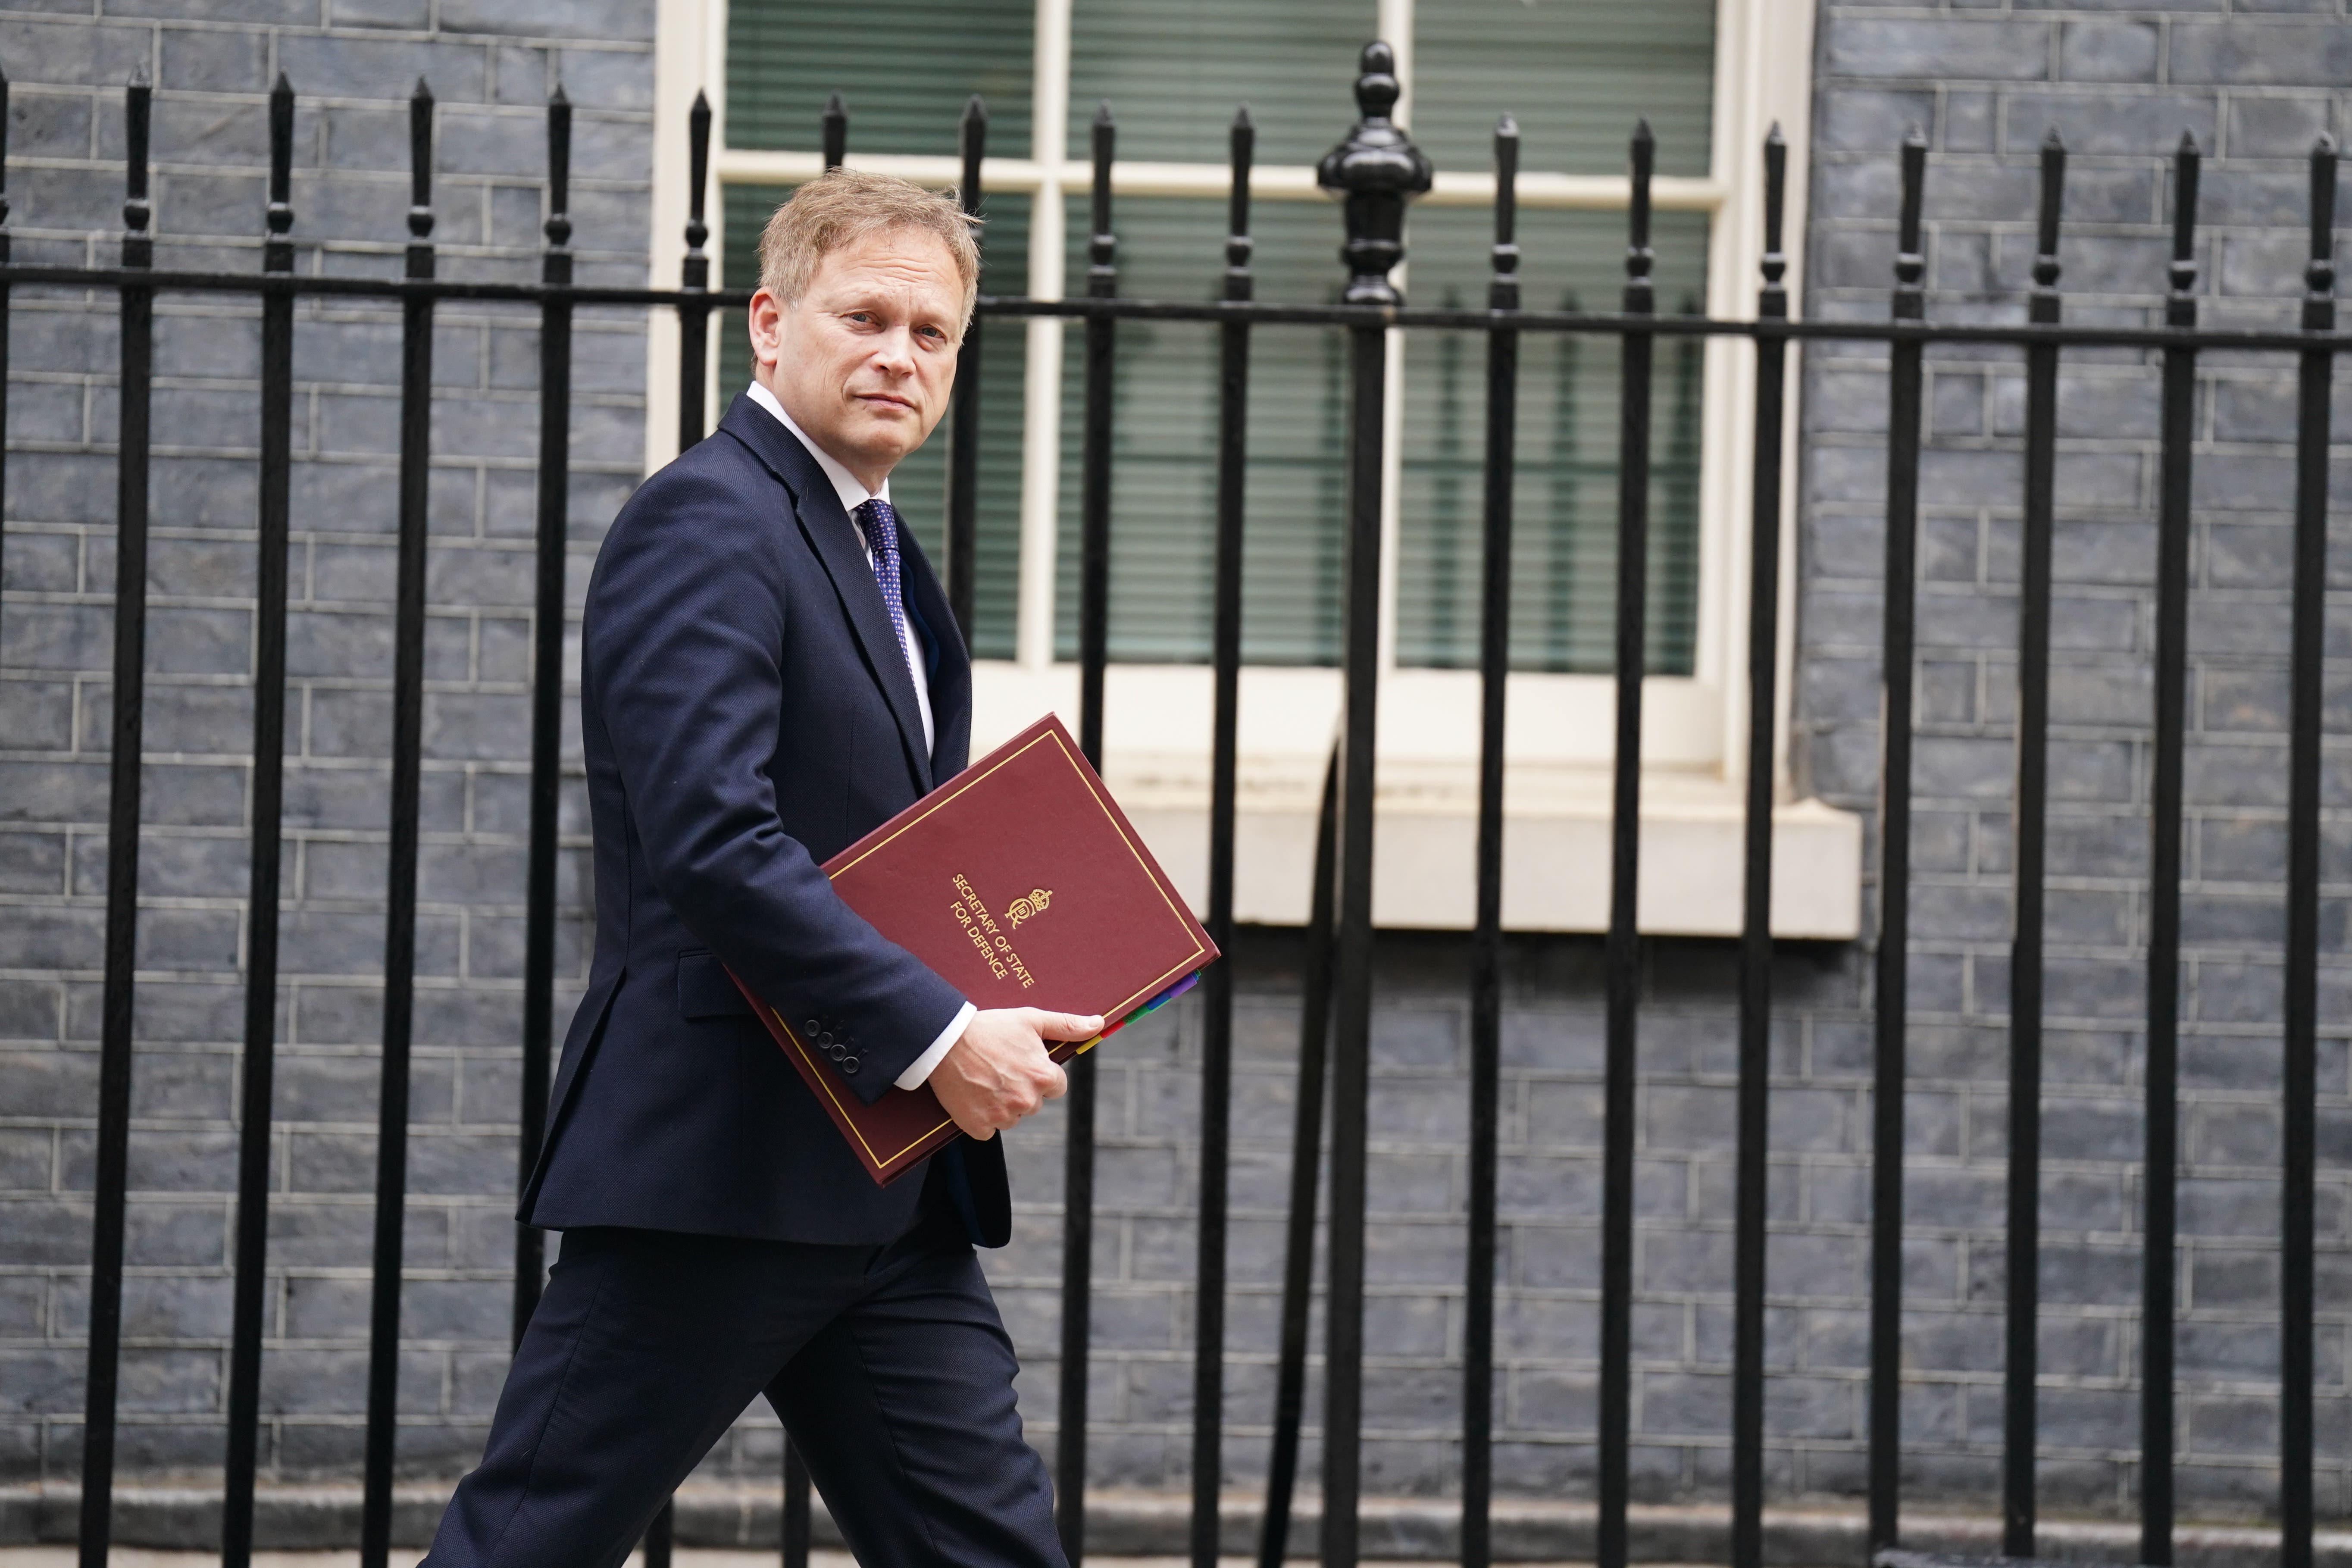 Defence secretary Grant Shapps has admitted that the process of awarding compensation has been too slow